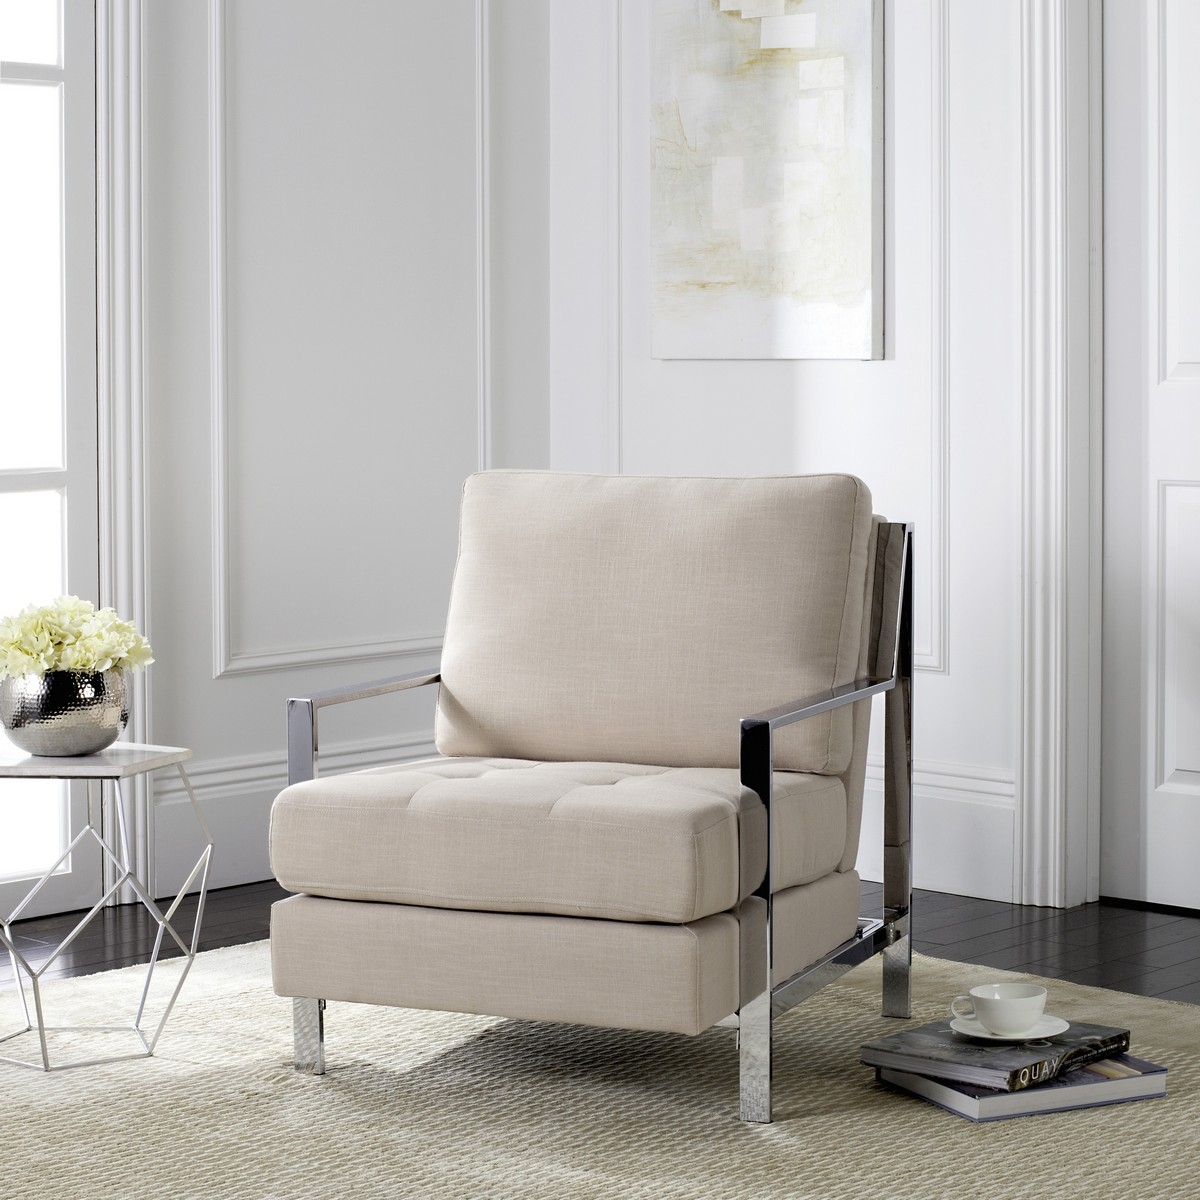 Walden Modern Tufted Linen Chrome Accent Chair - Beige - Arlo Home - Image 3